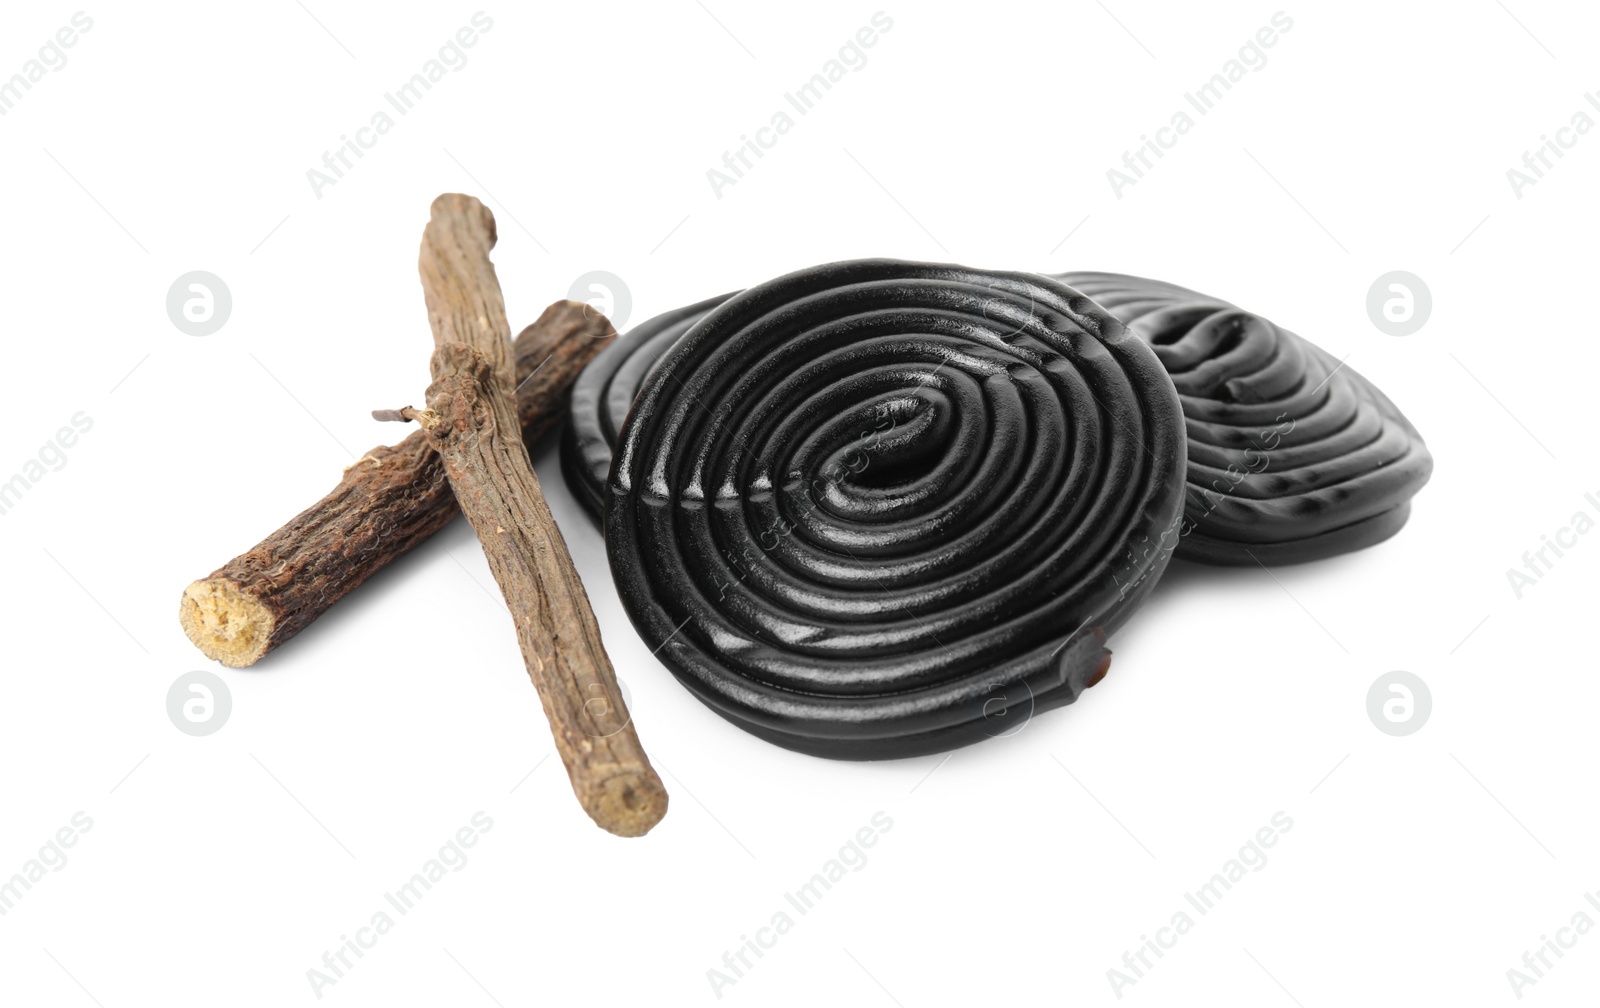 Photo of Tasty black candies and dried sticks of liquorice root on white background